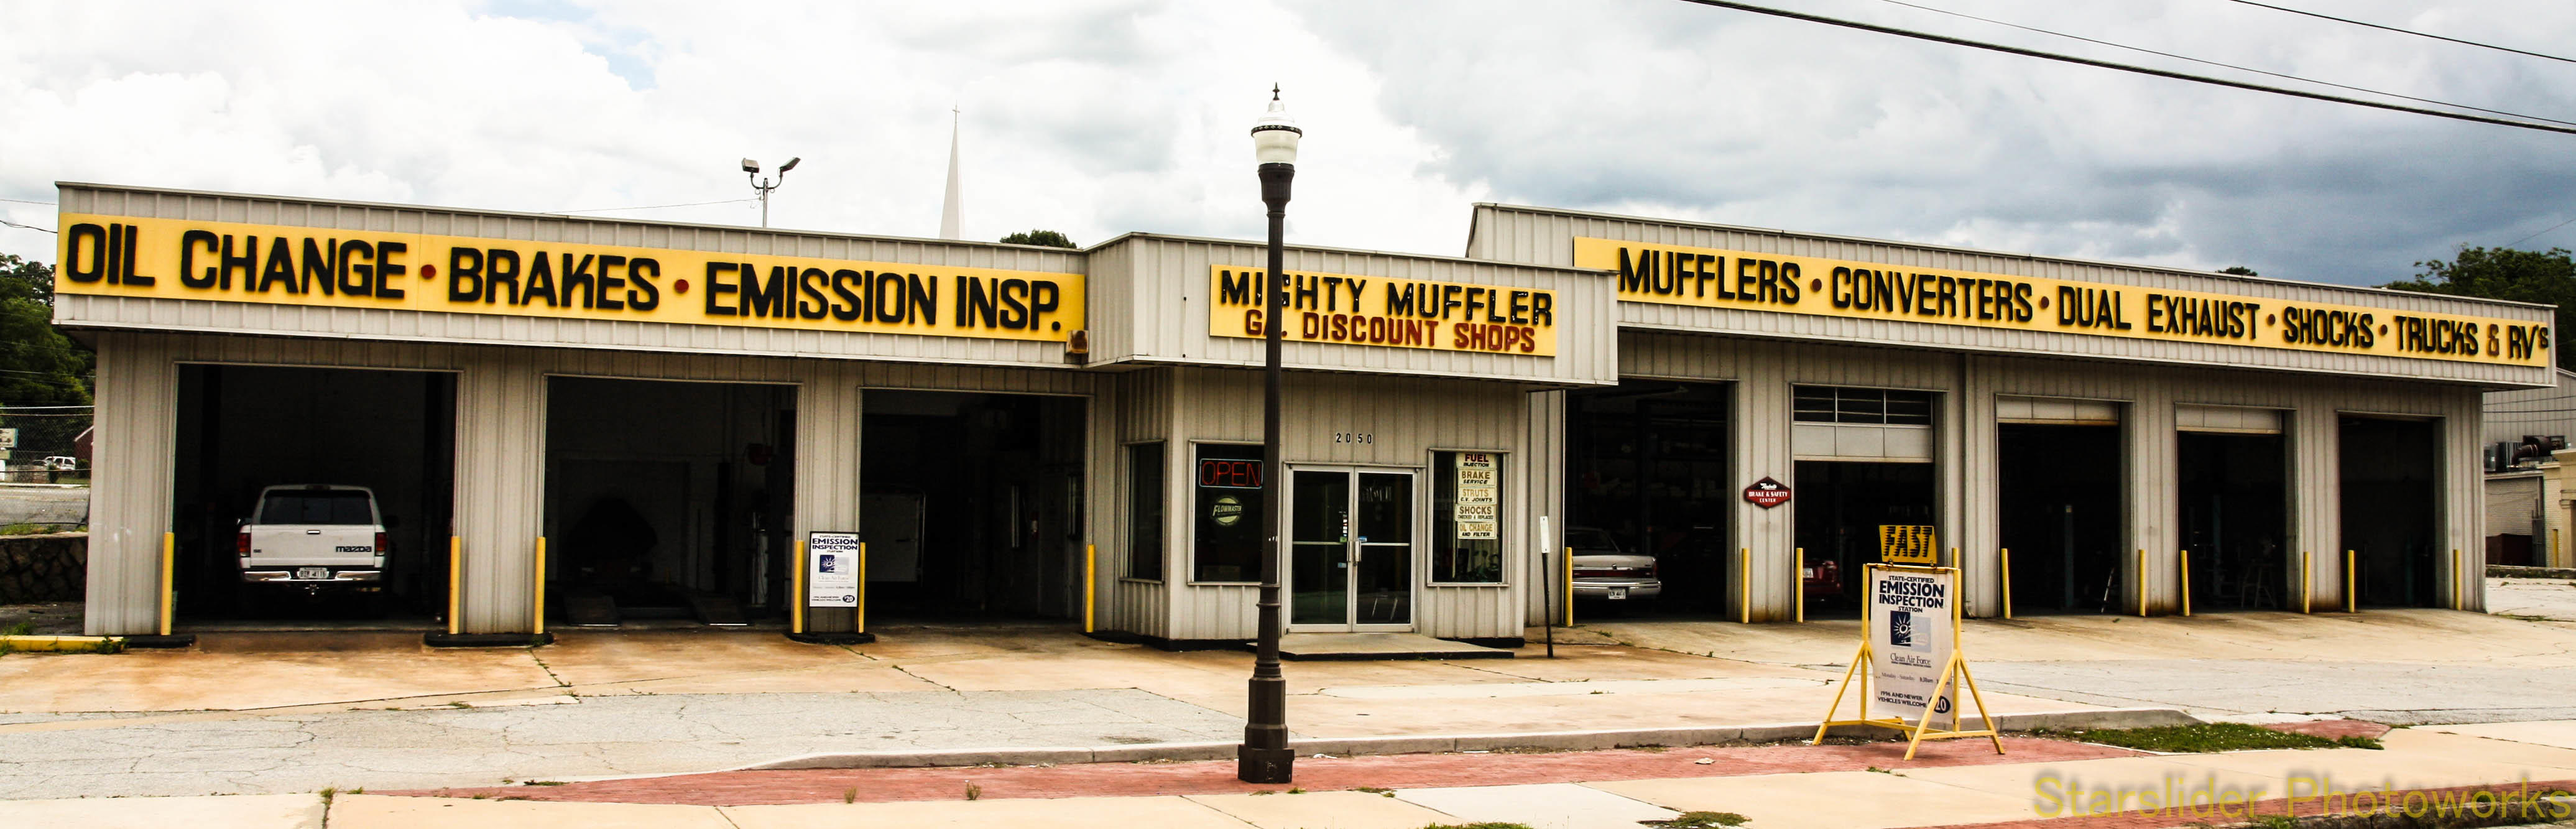 Mighty Muffler Auto Repair Center of Candler Road Coupons ...